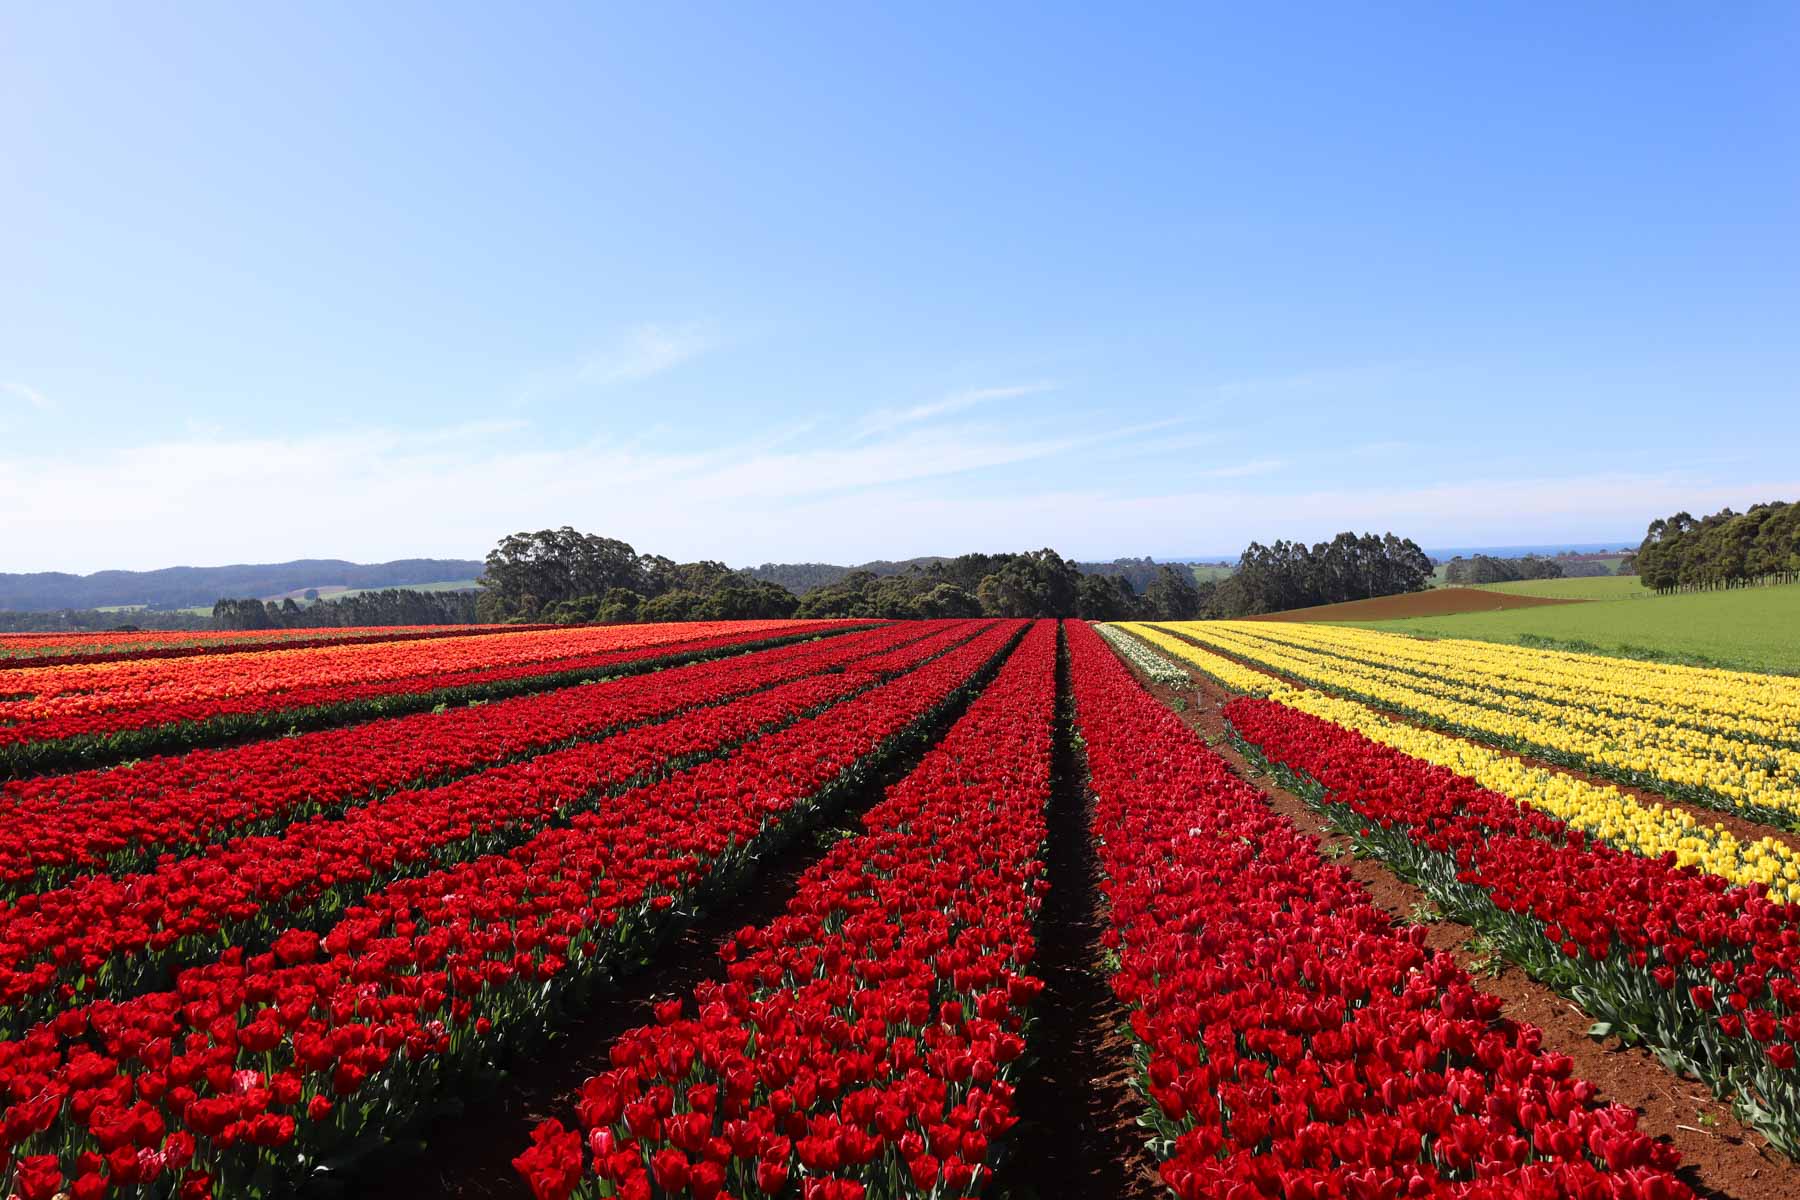 Coastline Tours Tasmania presents an enchanting journey to a private tulip farm. Discover the North-West's charm, book your spot now! 2